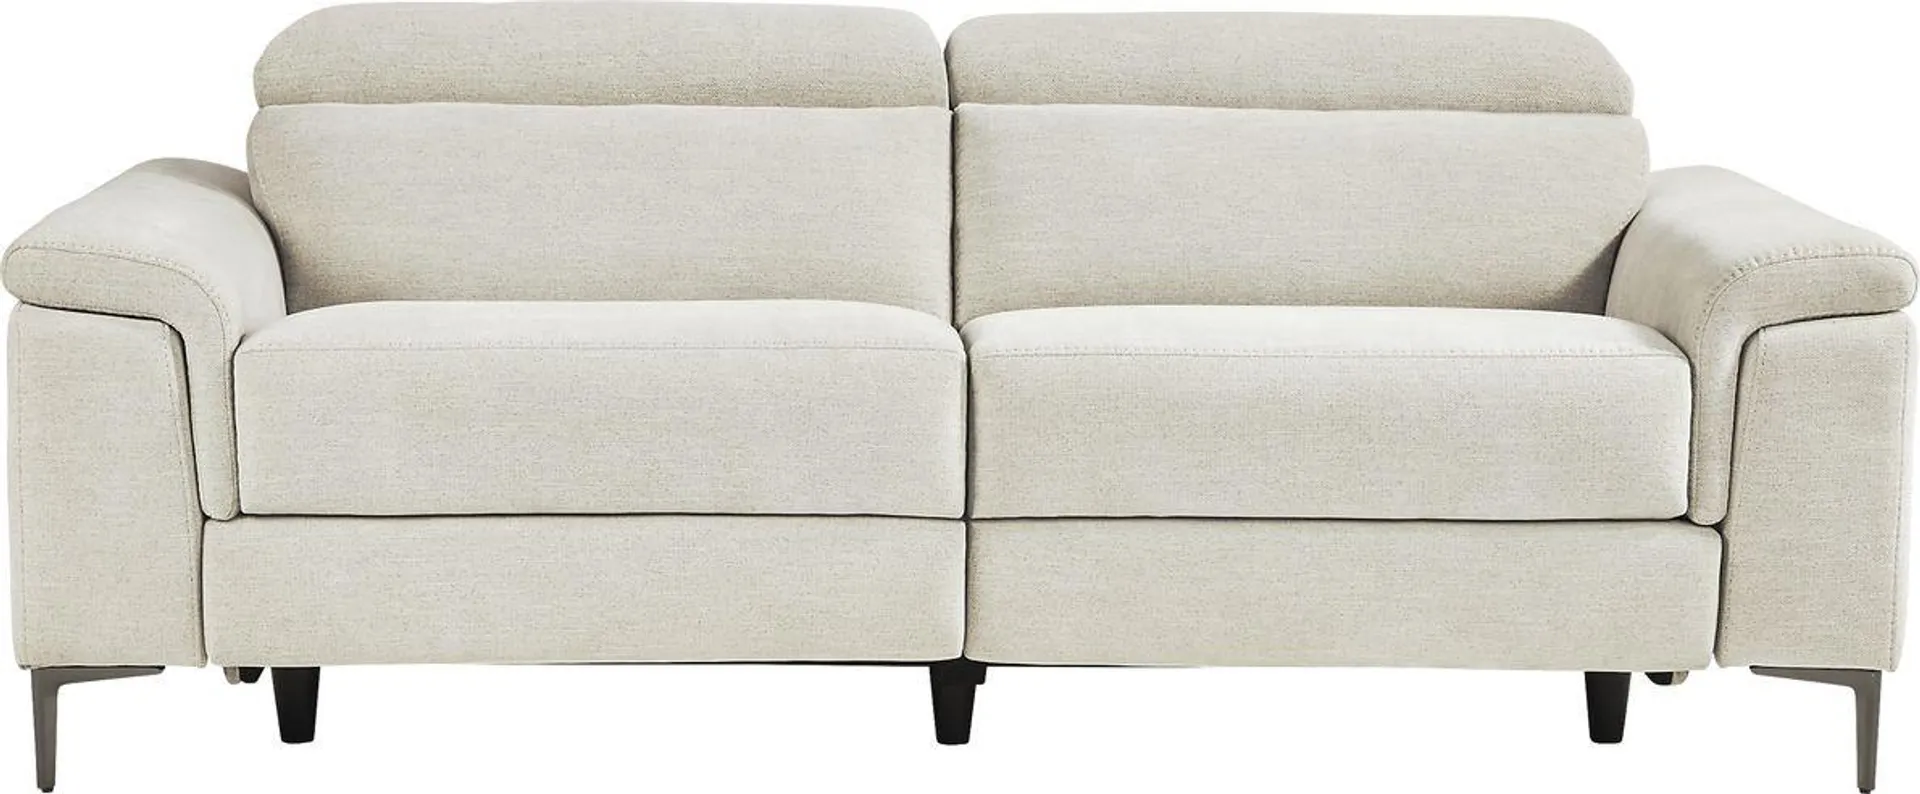 Weatherford Park Dual Power Reclining Sofa